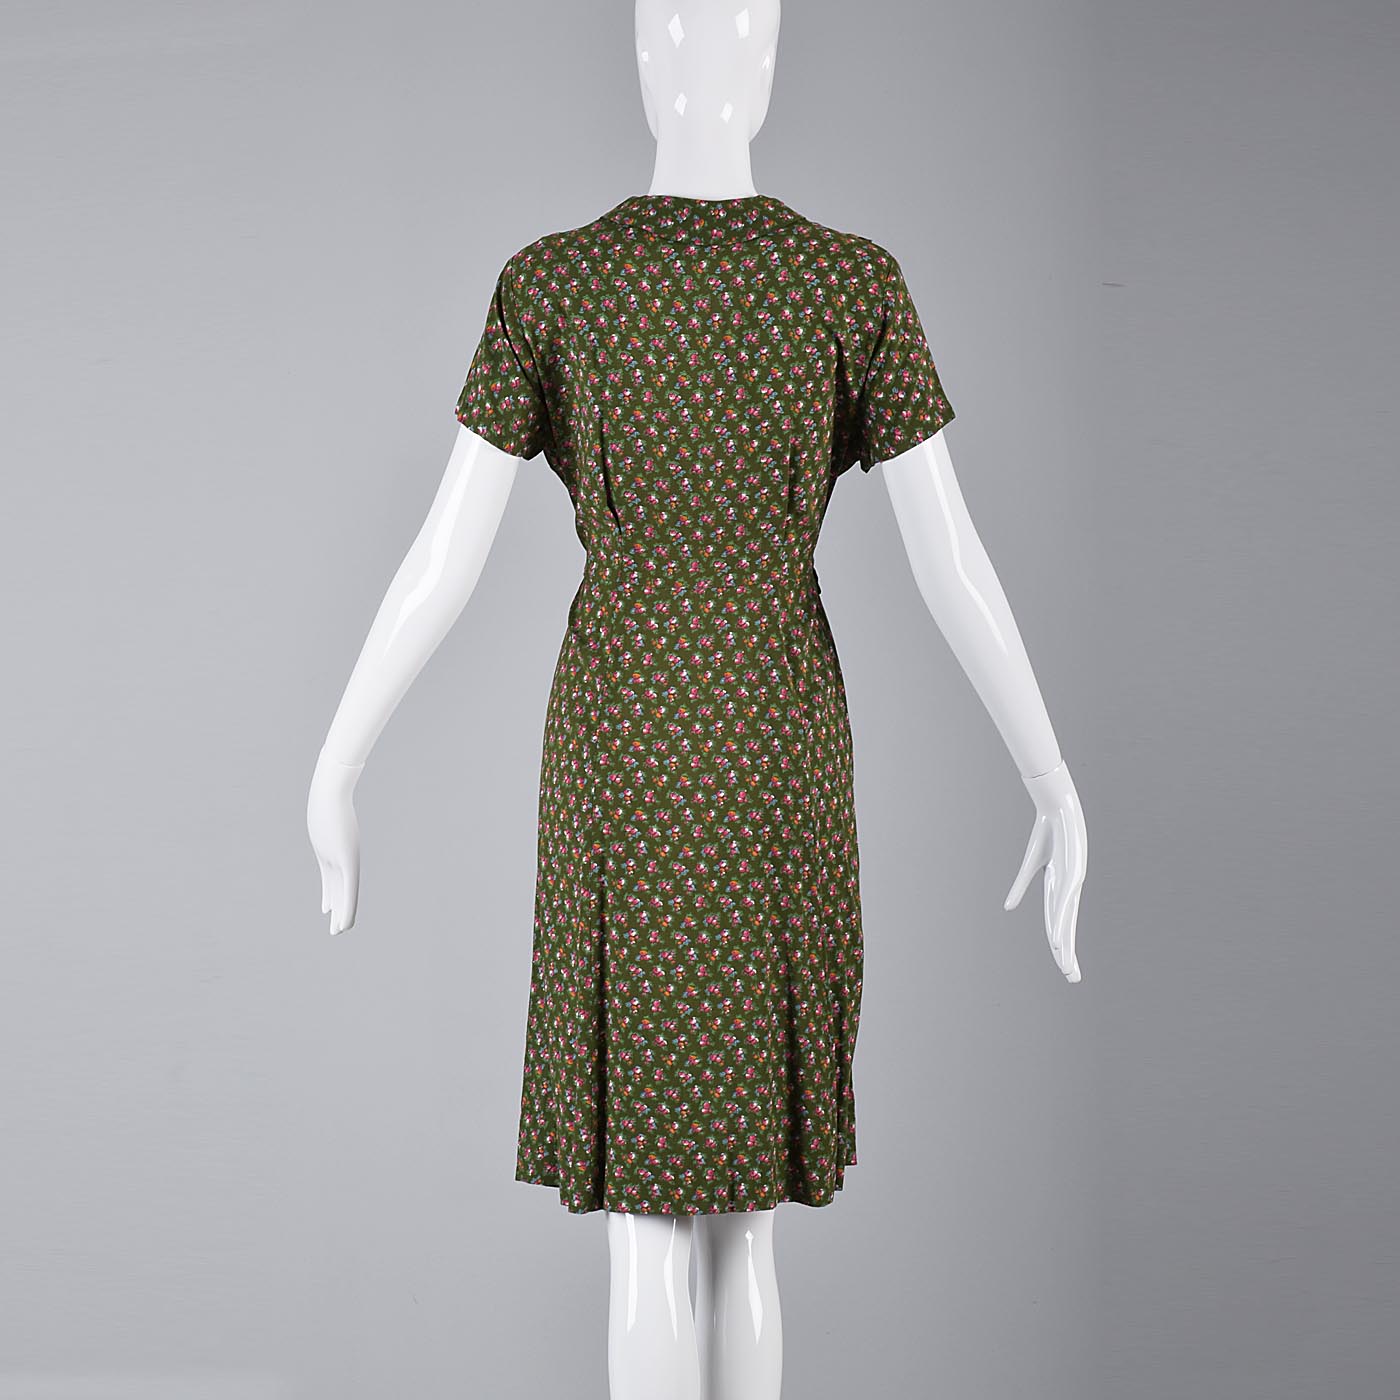 1940s Green Day Dress with Pink Floral Print